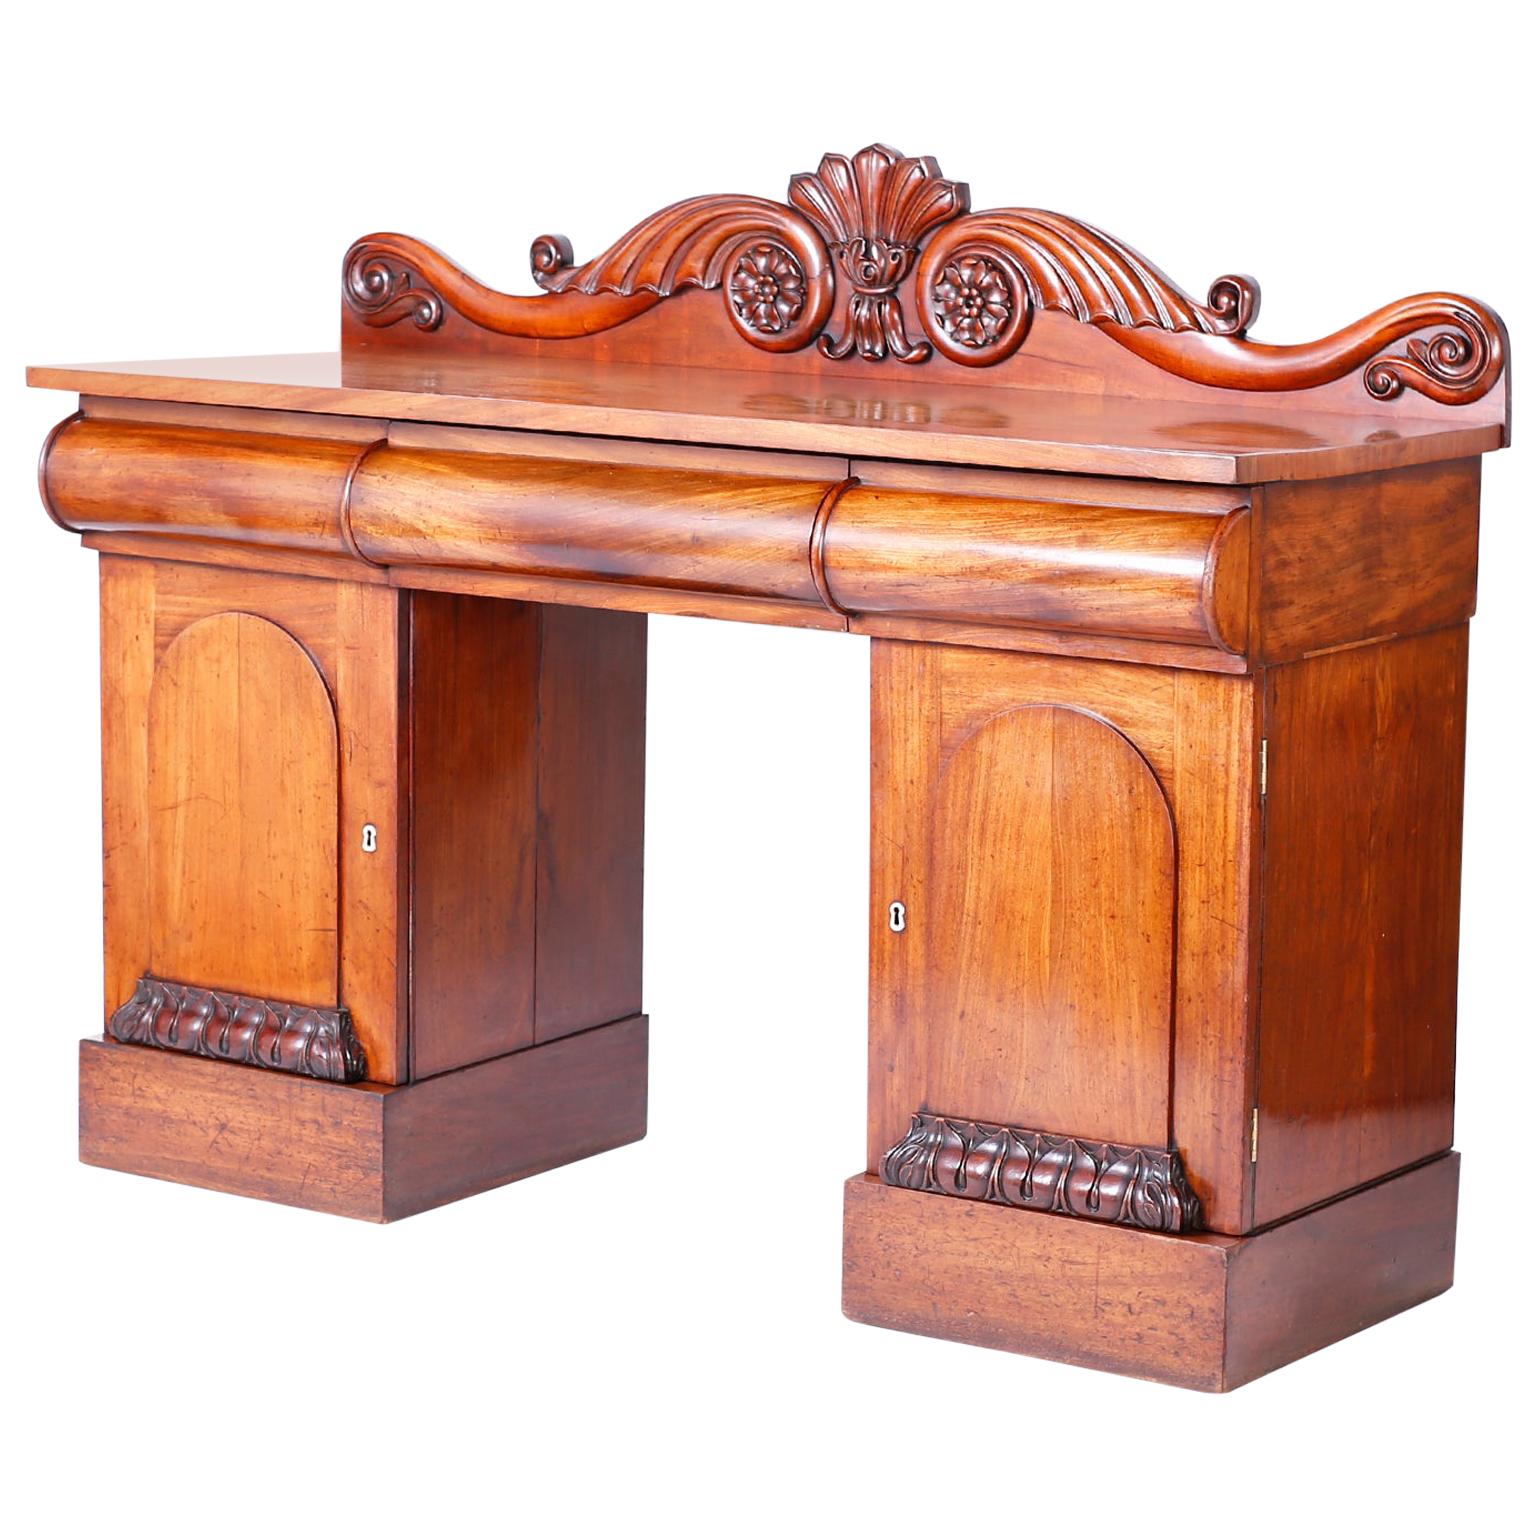 British Colonial Style Sideboard or Server